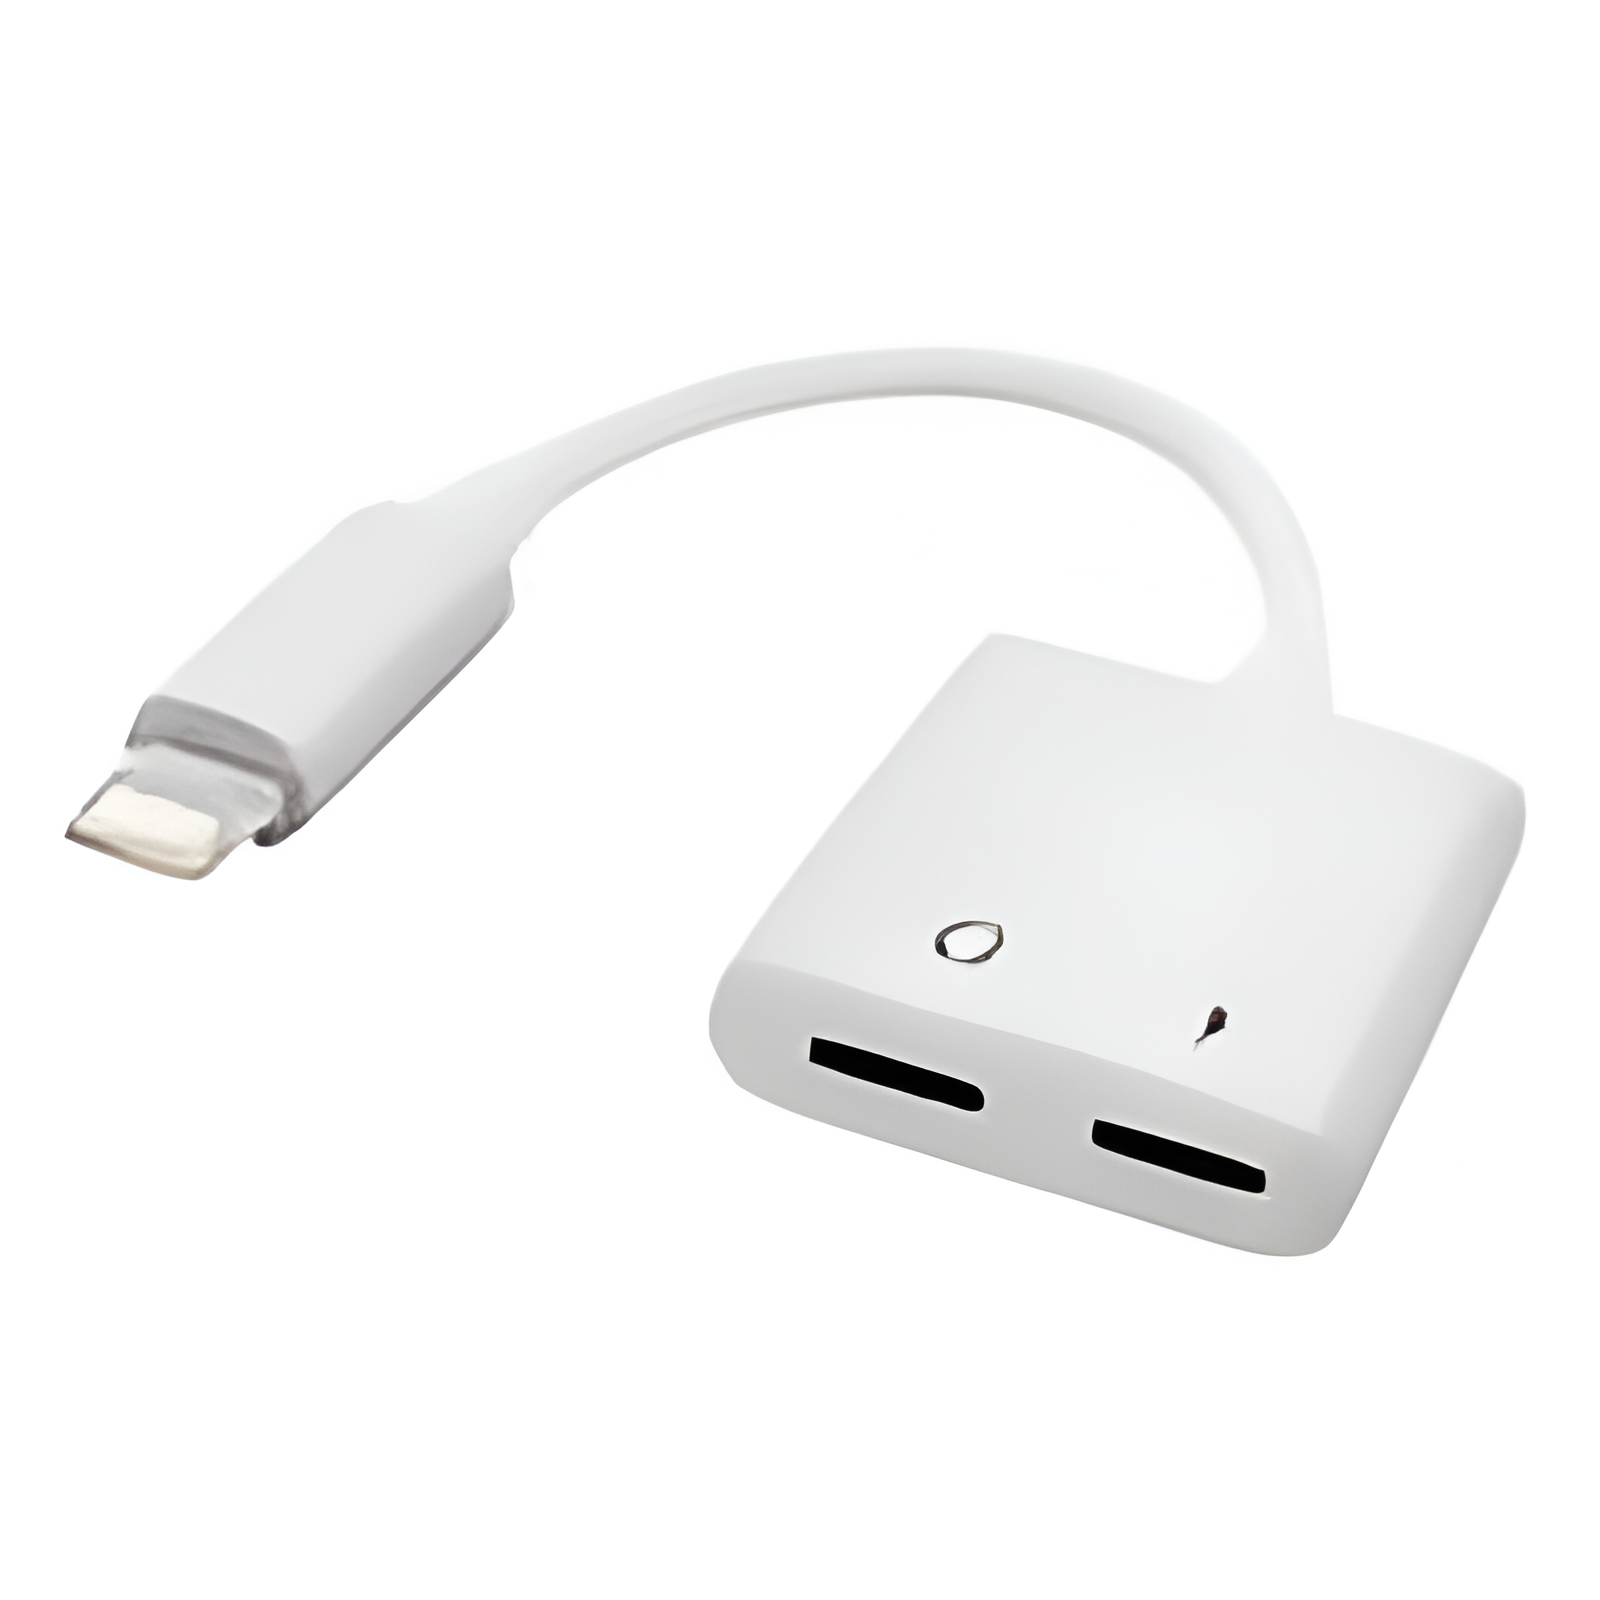 Dual lightning audio & charge adapter